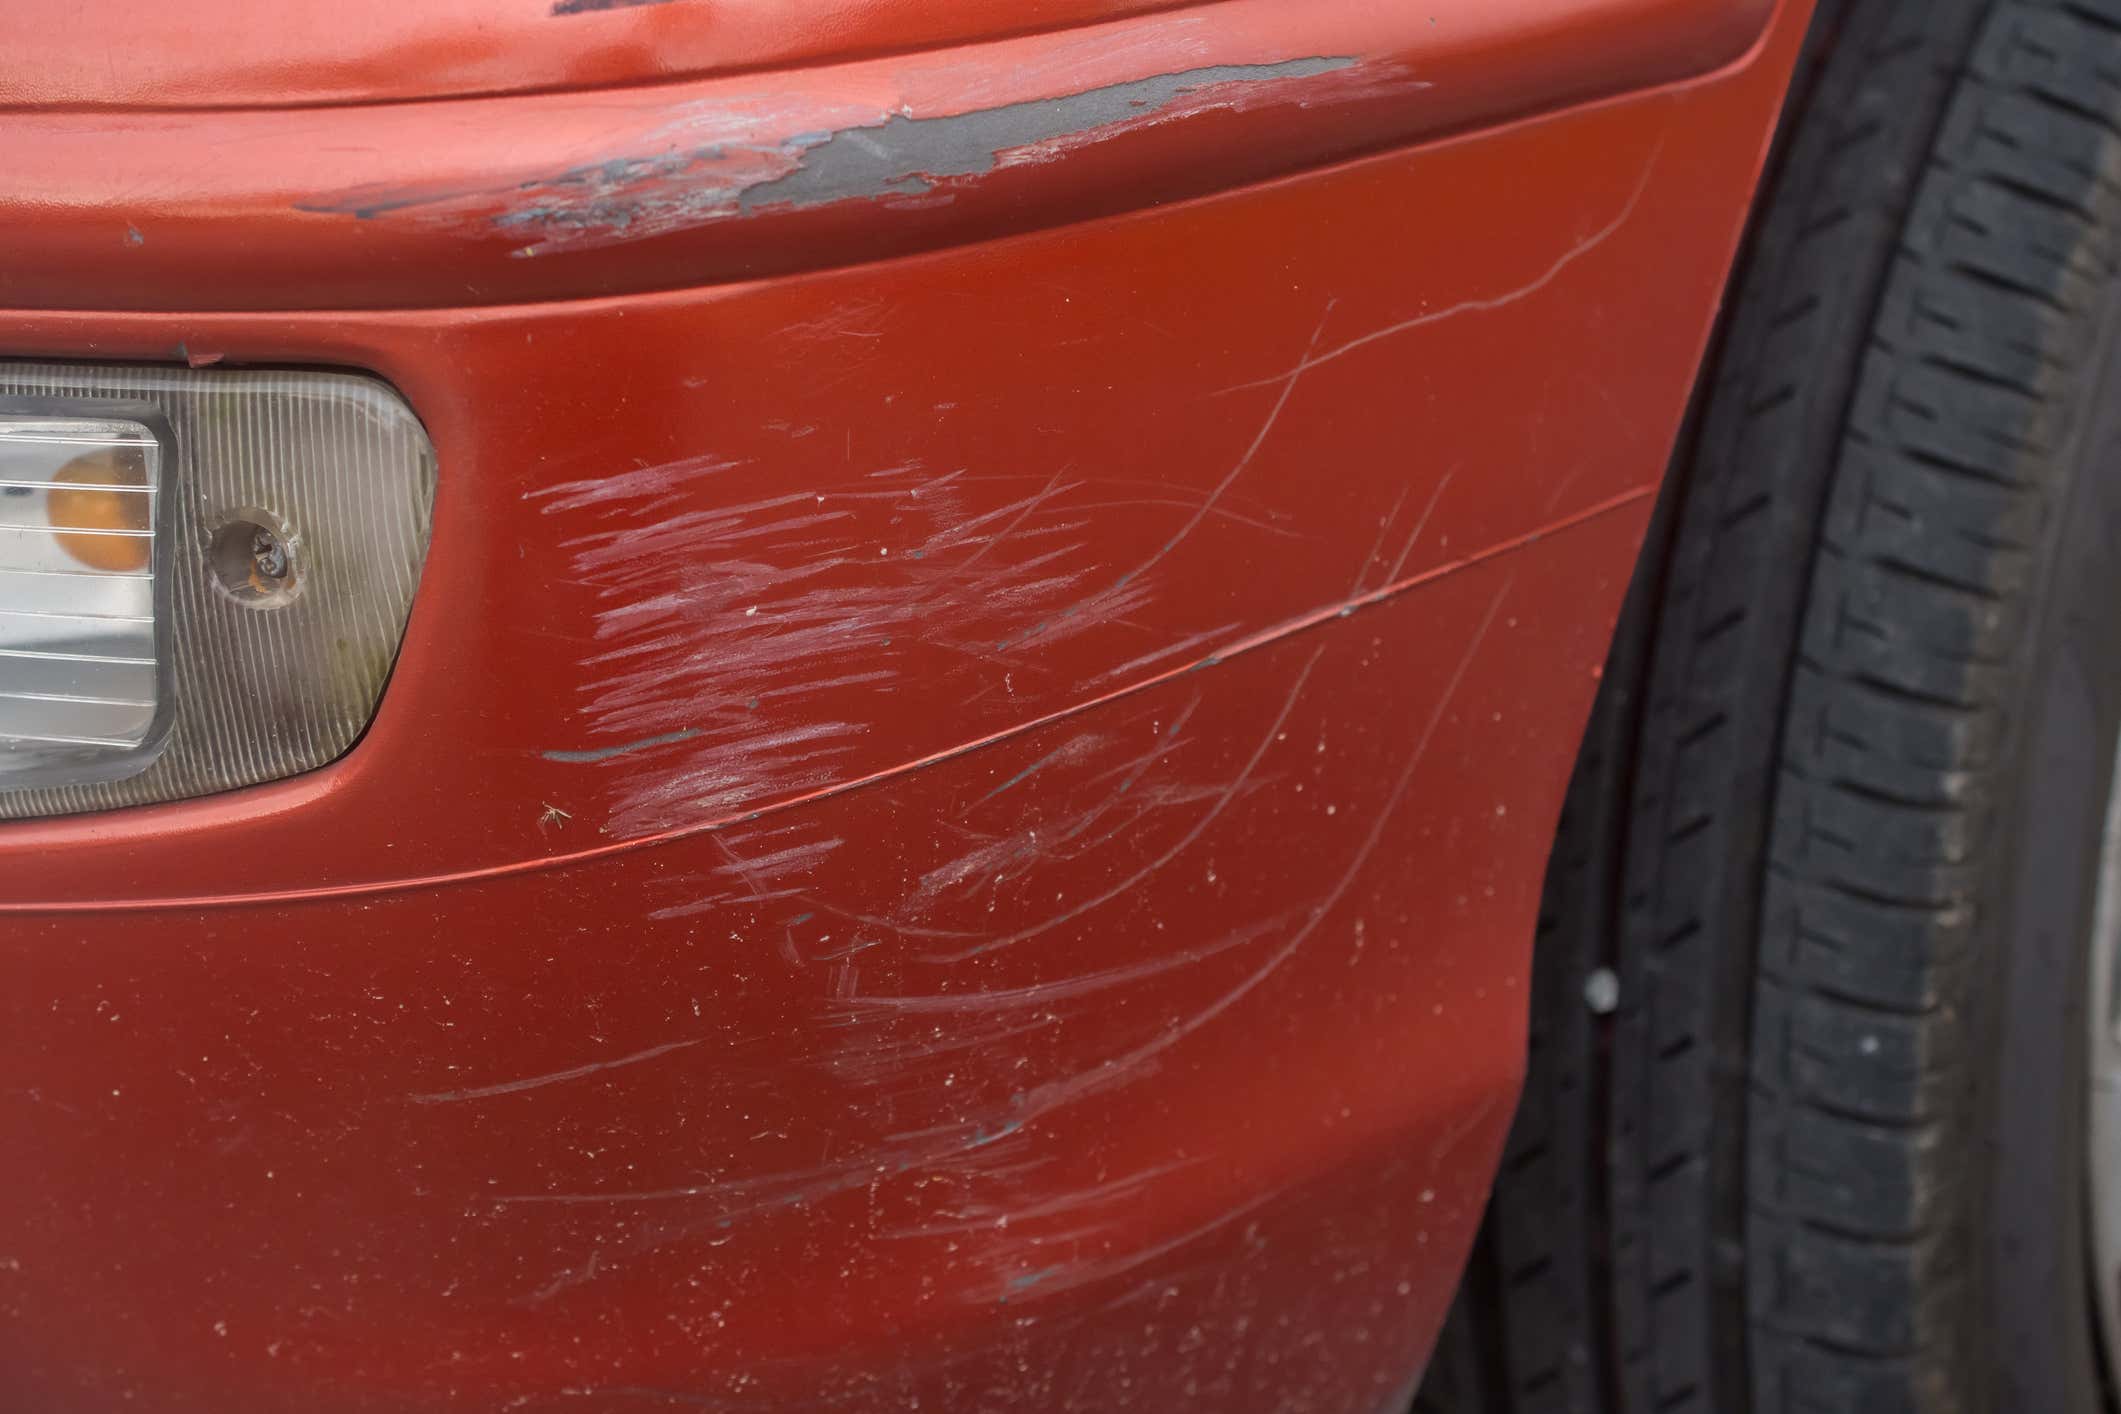 Red bumper car scratched with deep damage to the paint.